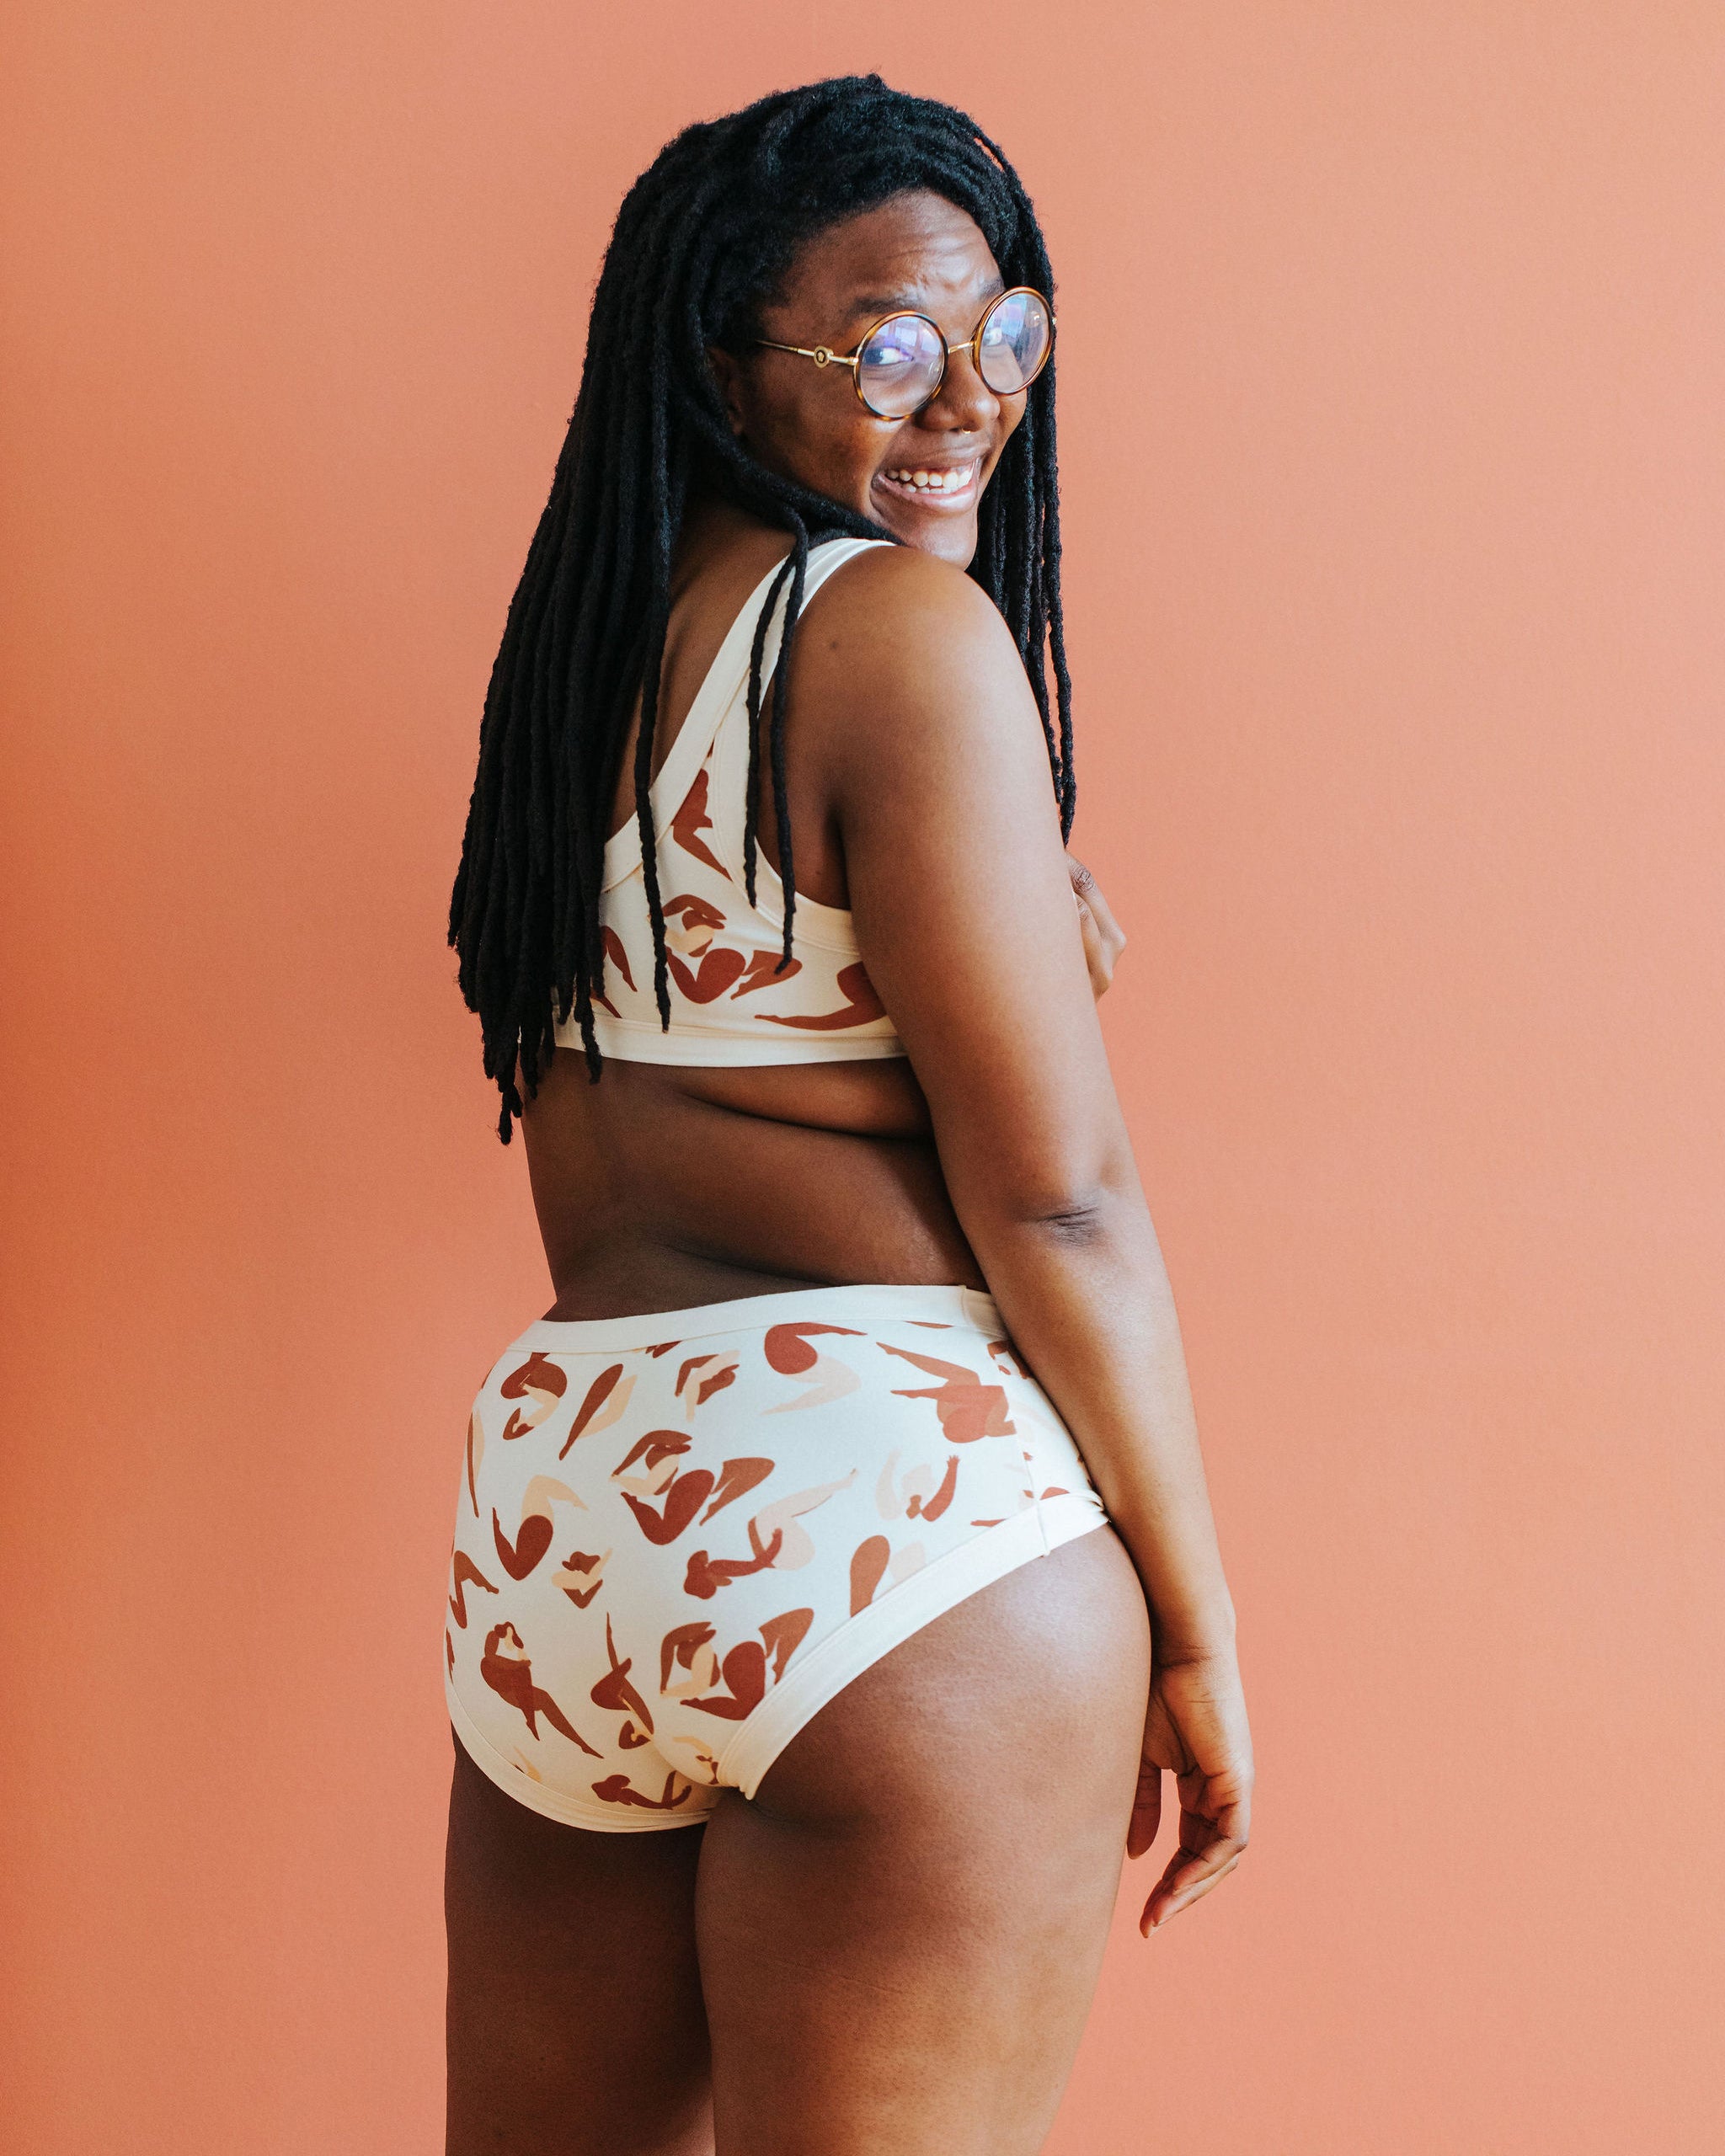 Model with their back to the camera wearing Thunderpants Hipster style underwear and Bralette in Bodies in Motion: women in different shades of browns and tans.